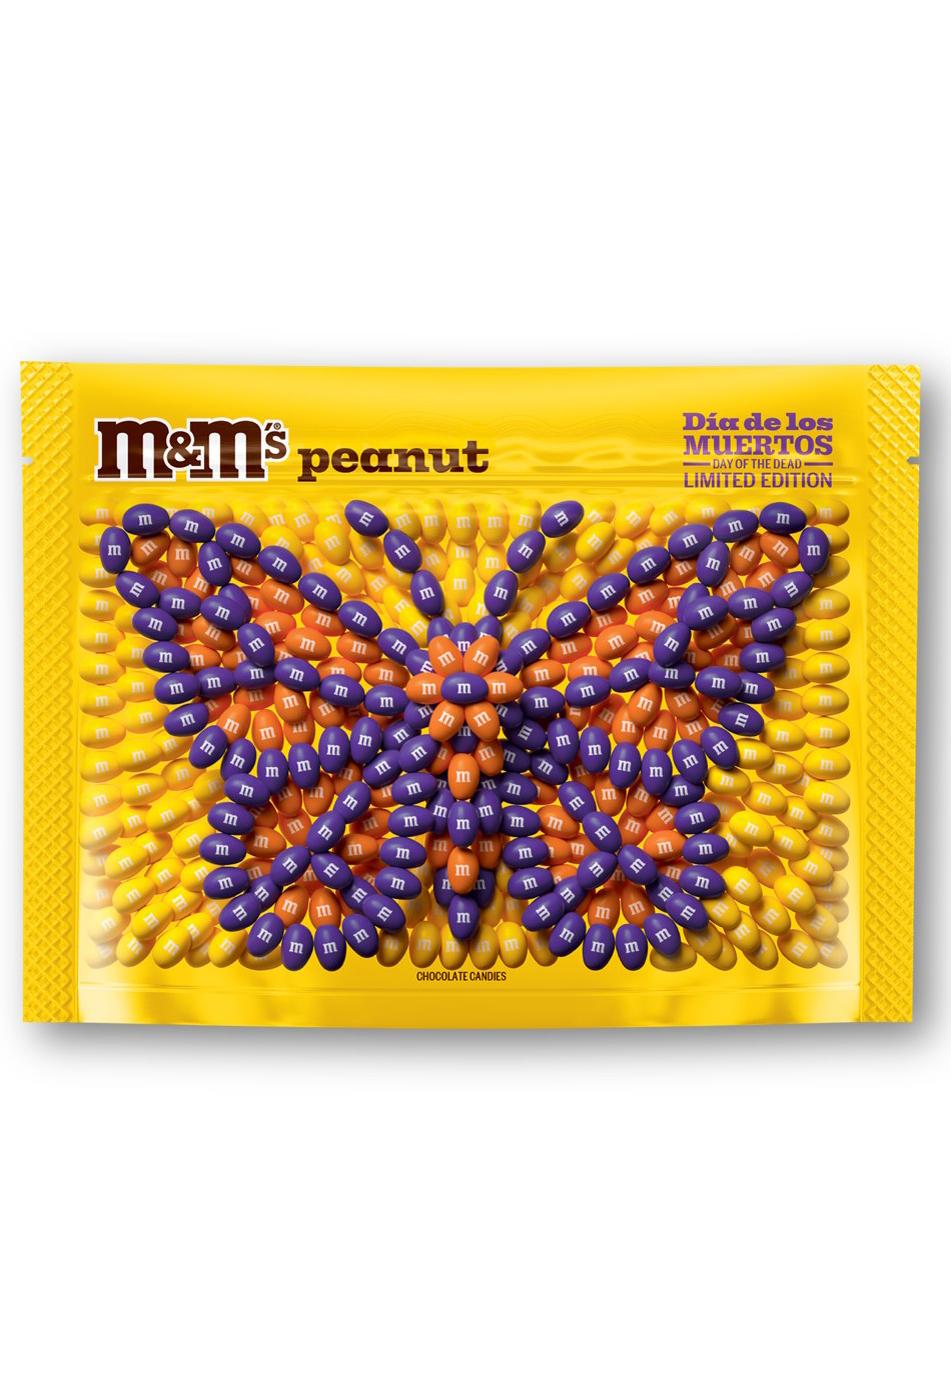 M&M'S Peanut Chocolate Candies - Sharing Size - Shop Candy at H-E-B